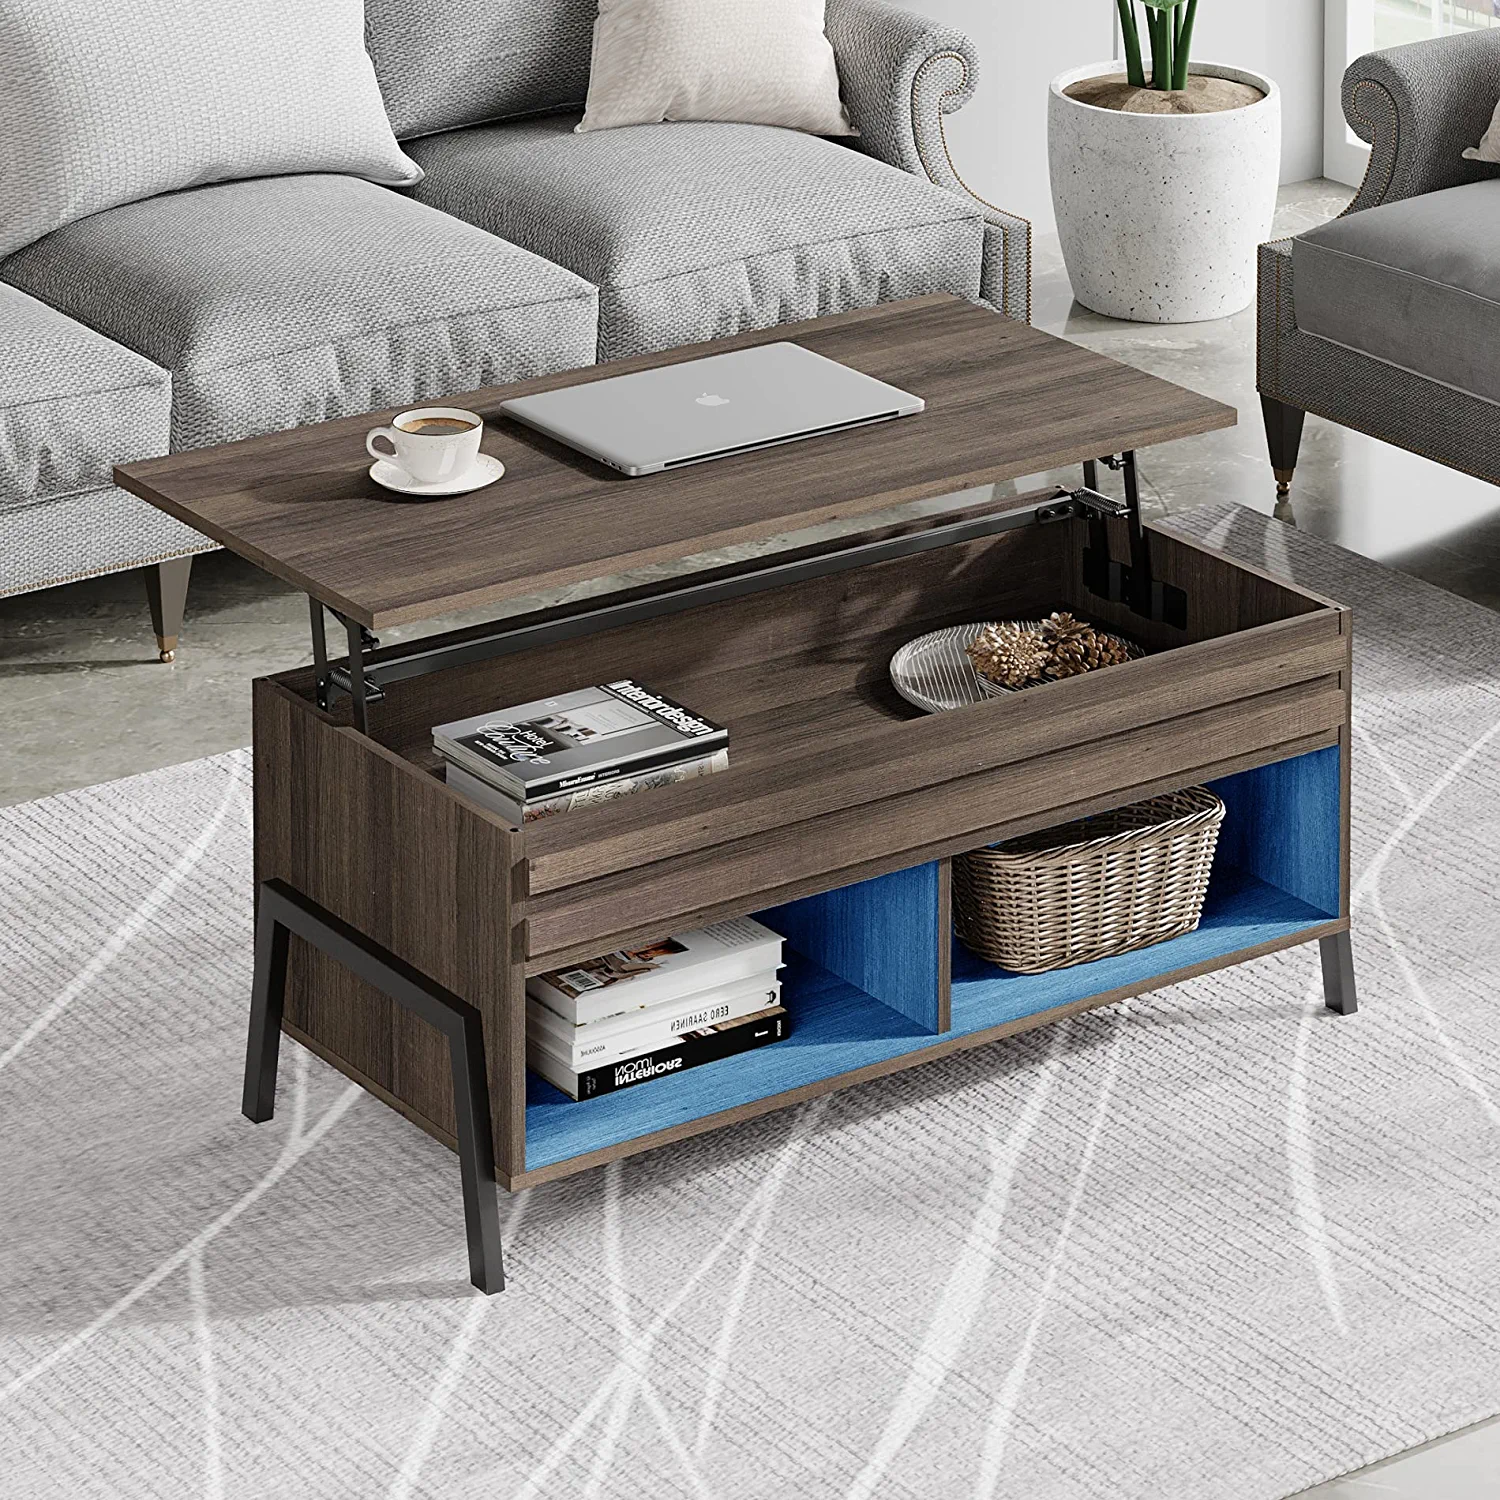 WAMPAT 42" Modern Lift Top Coffee Table with Lift Tabletop & Storage for Home Decor, Brown